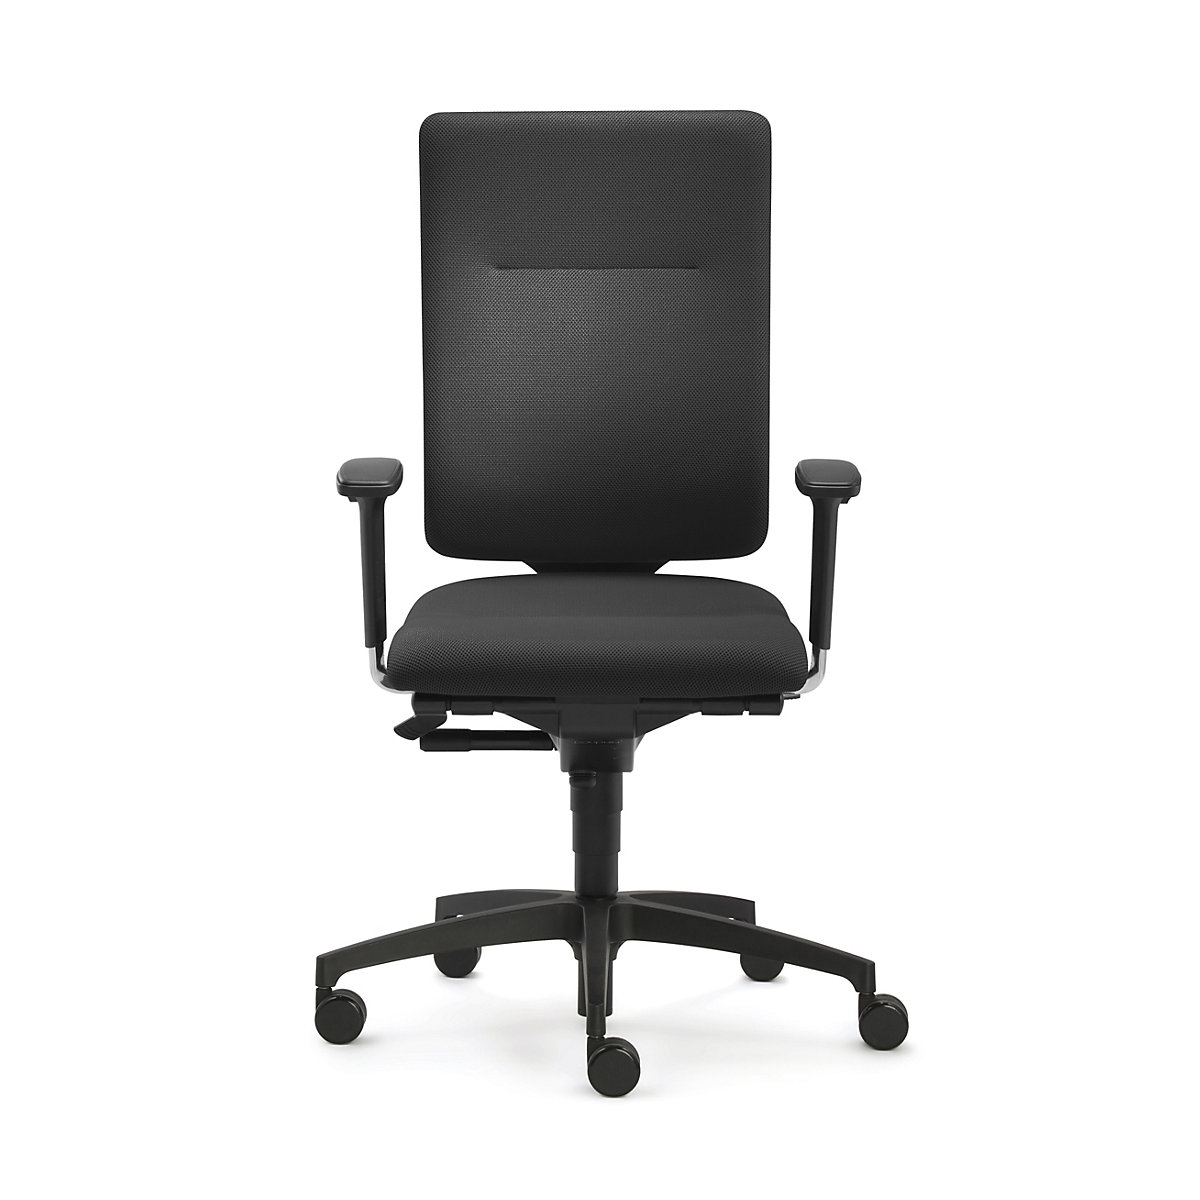 InTouch office swivel chair - Dauphin